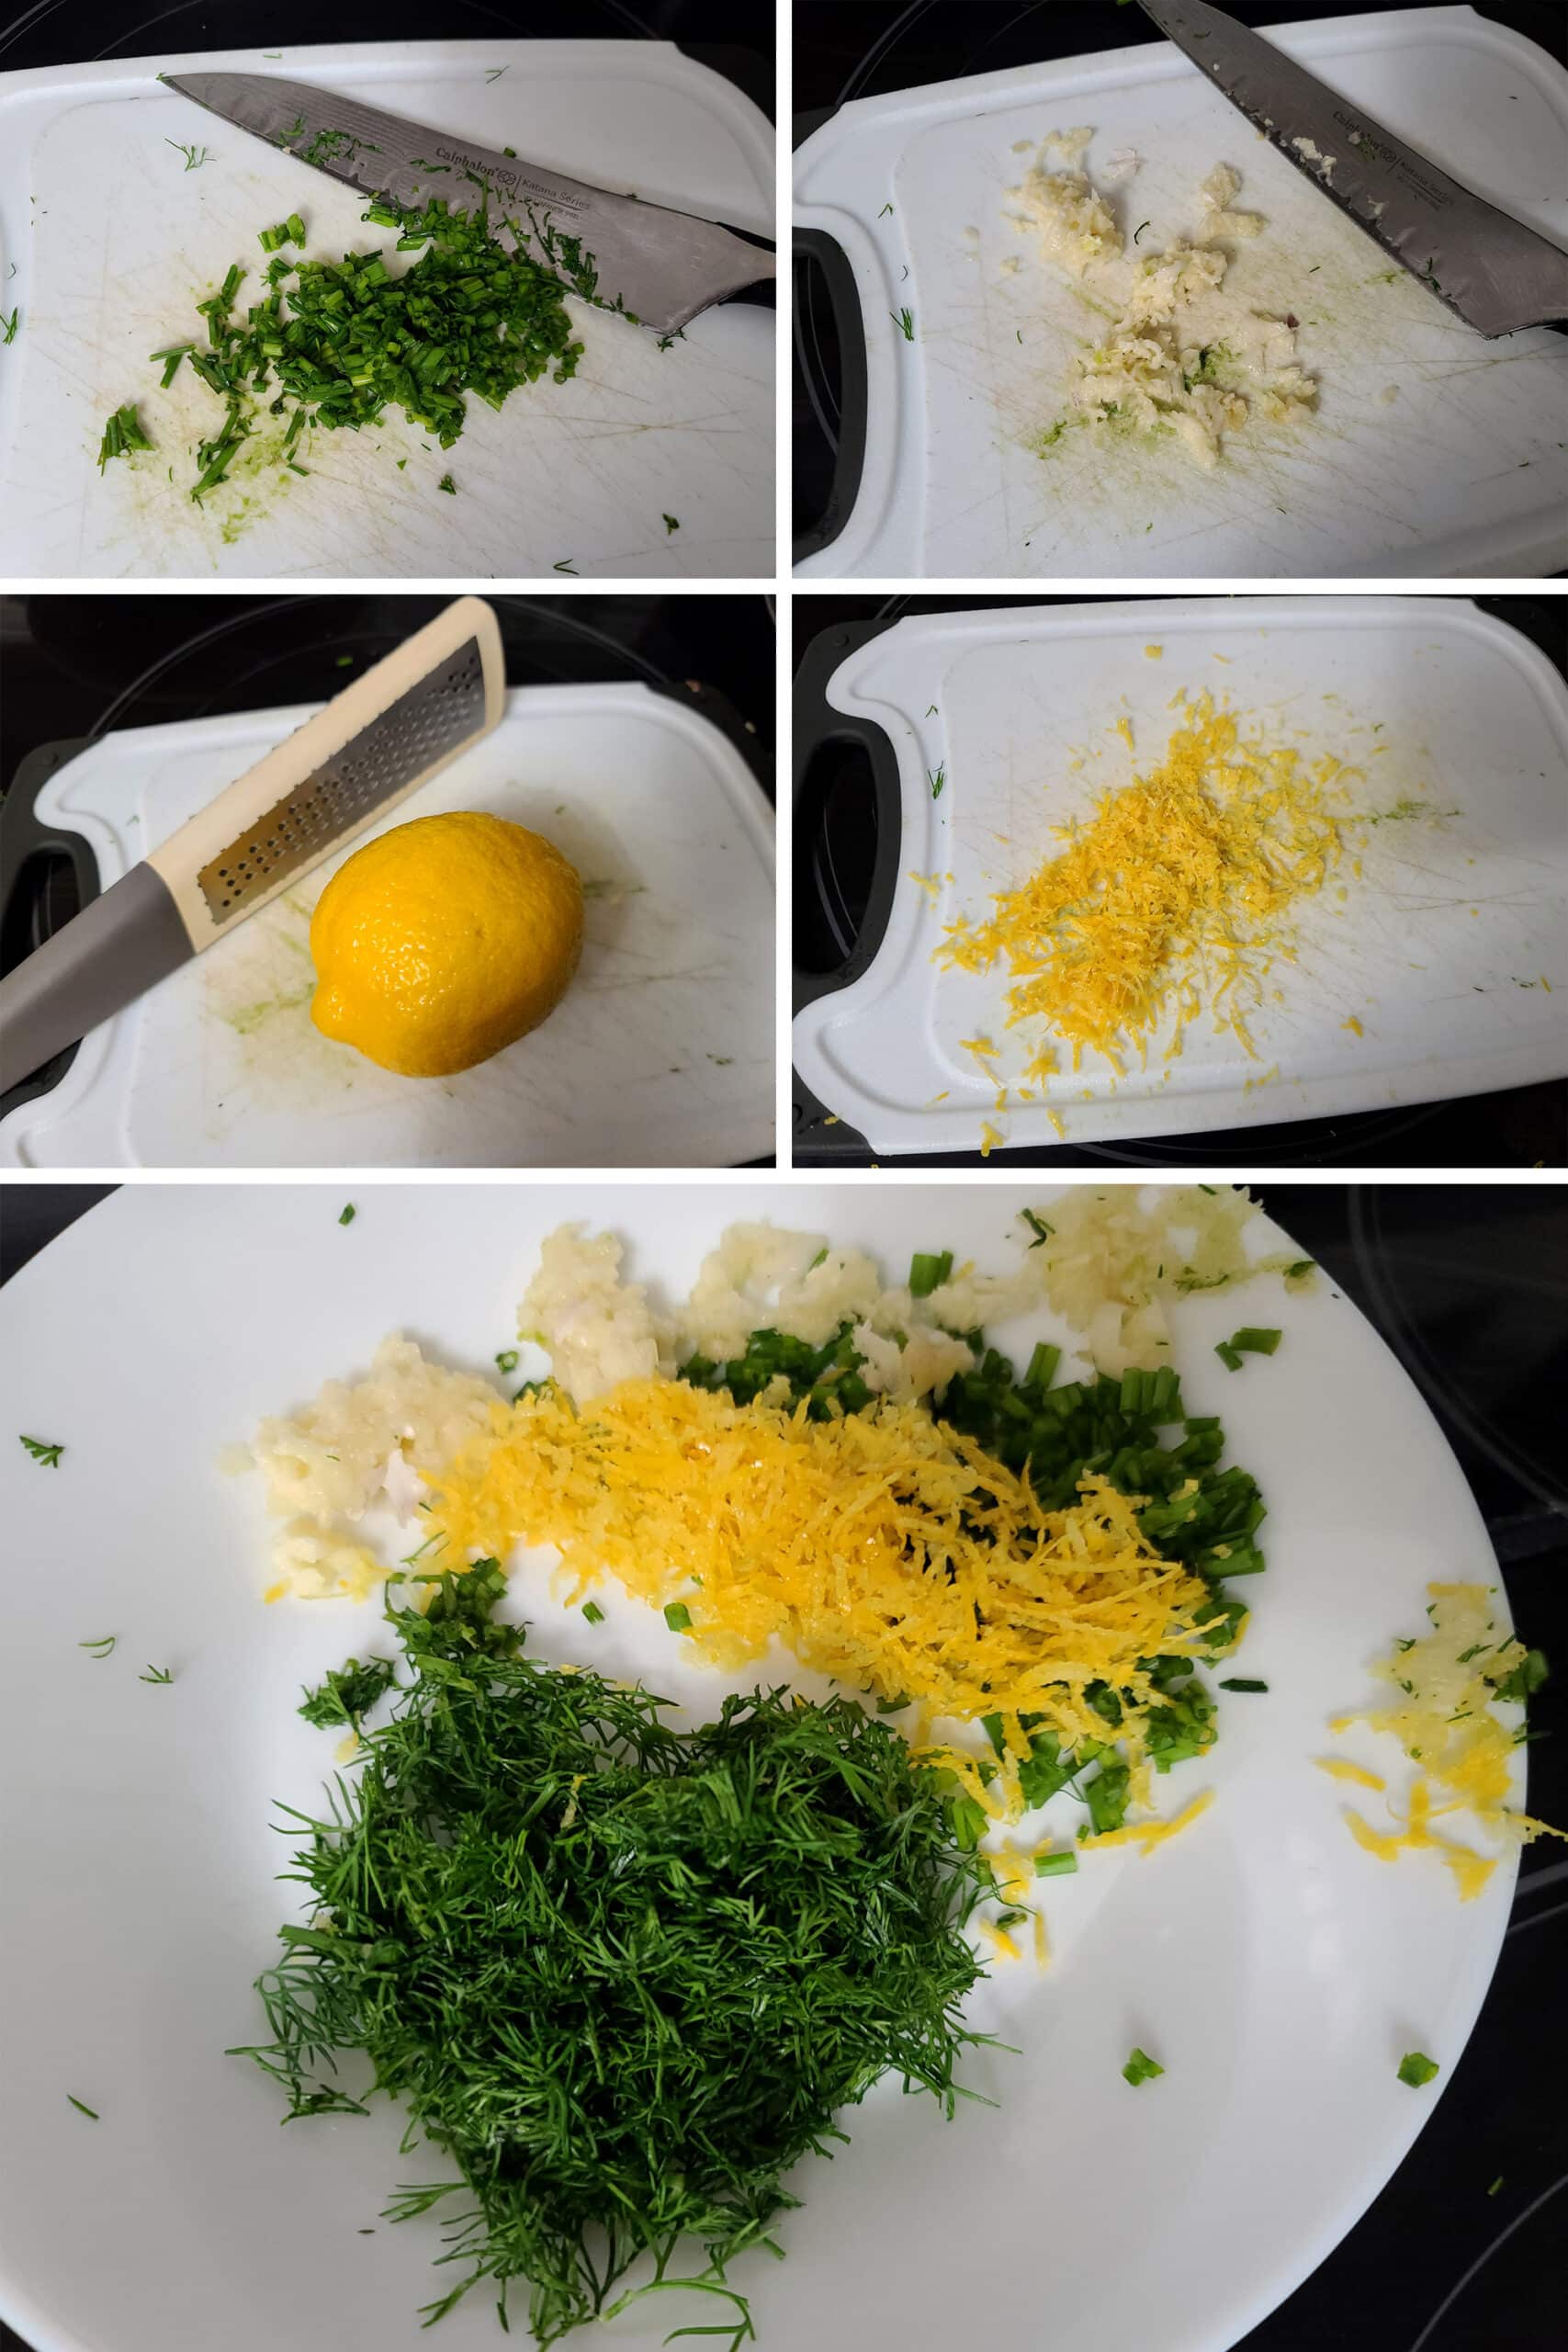 A 5 part image showing the herbs chopped, garlic pressed, and lemon zested.